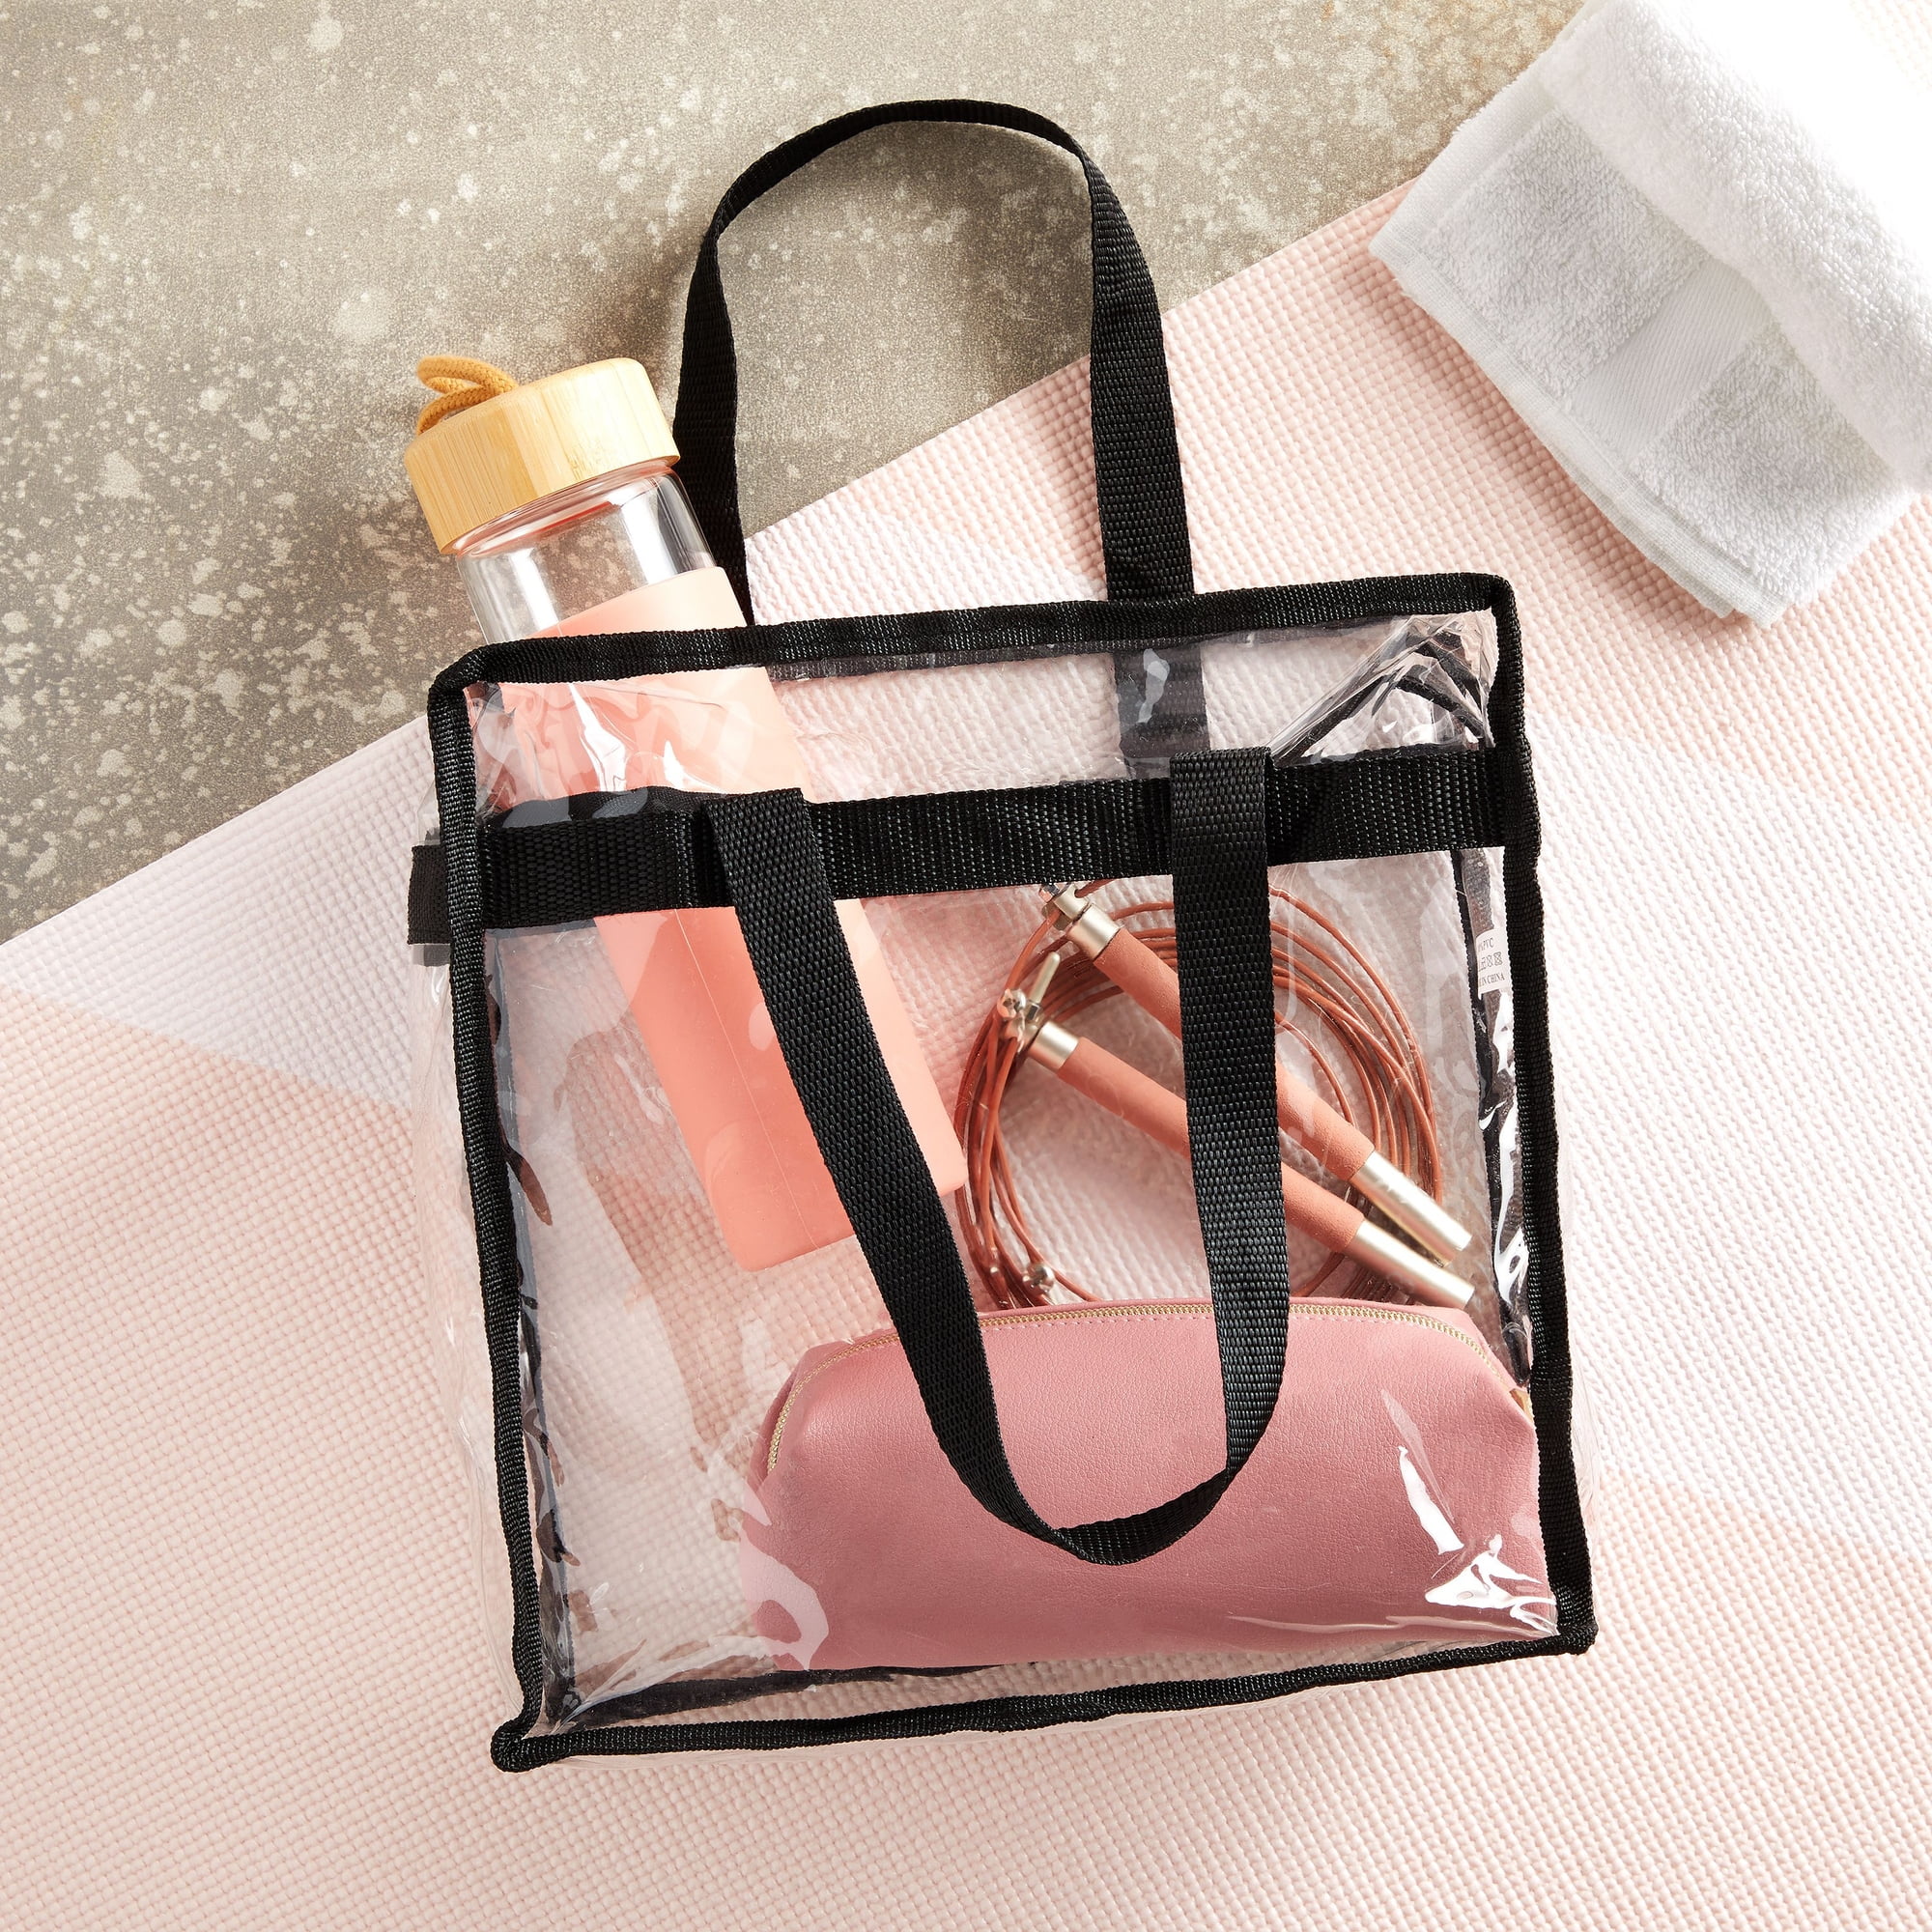 Fuel Clear Tote Bag - Black - 12 in